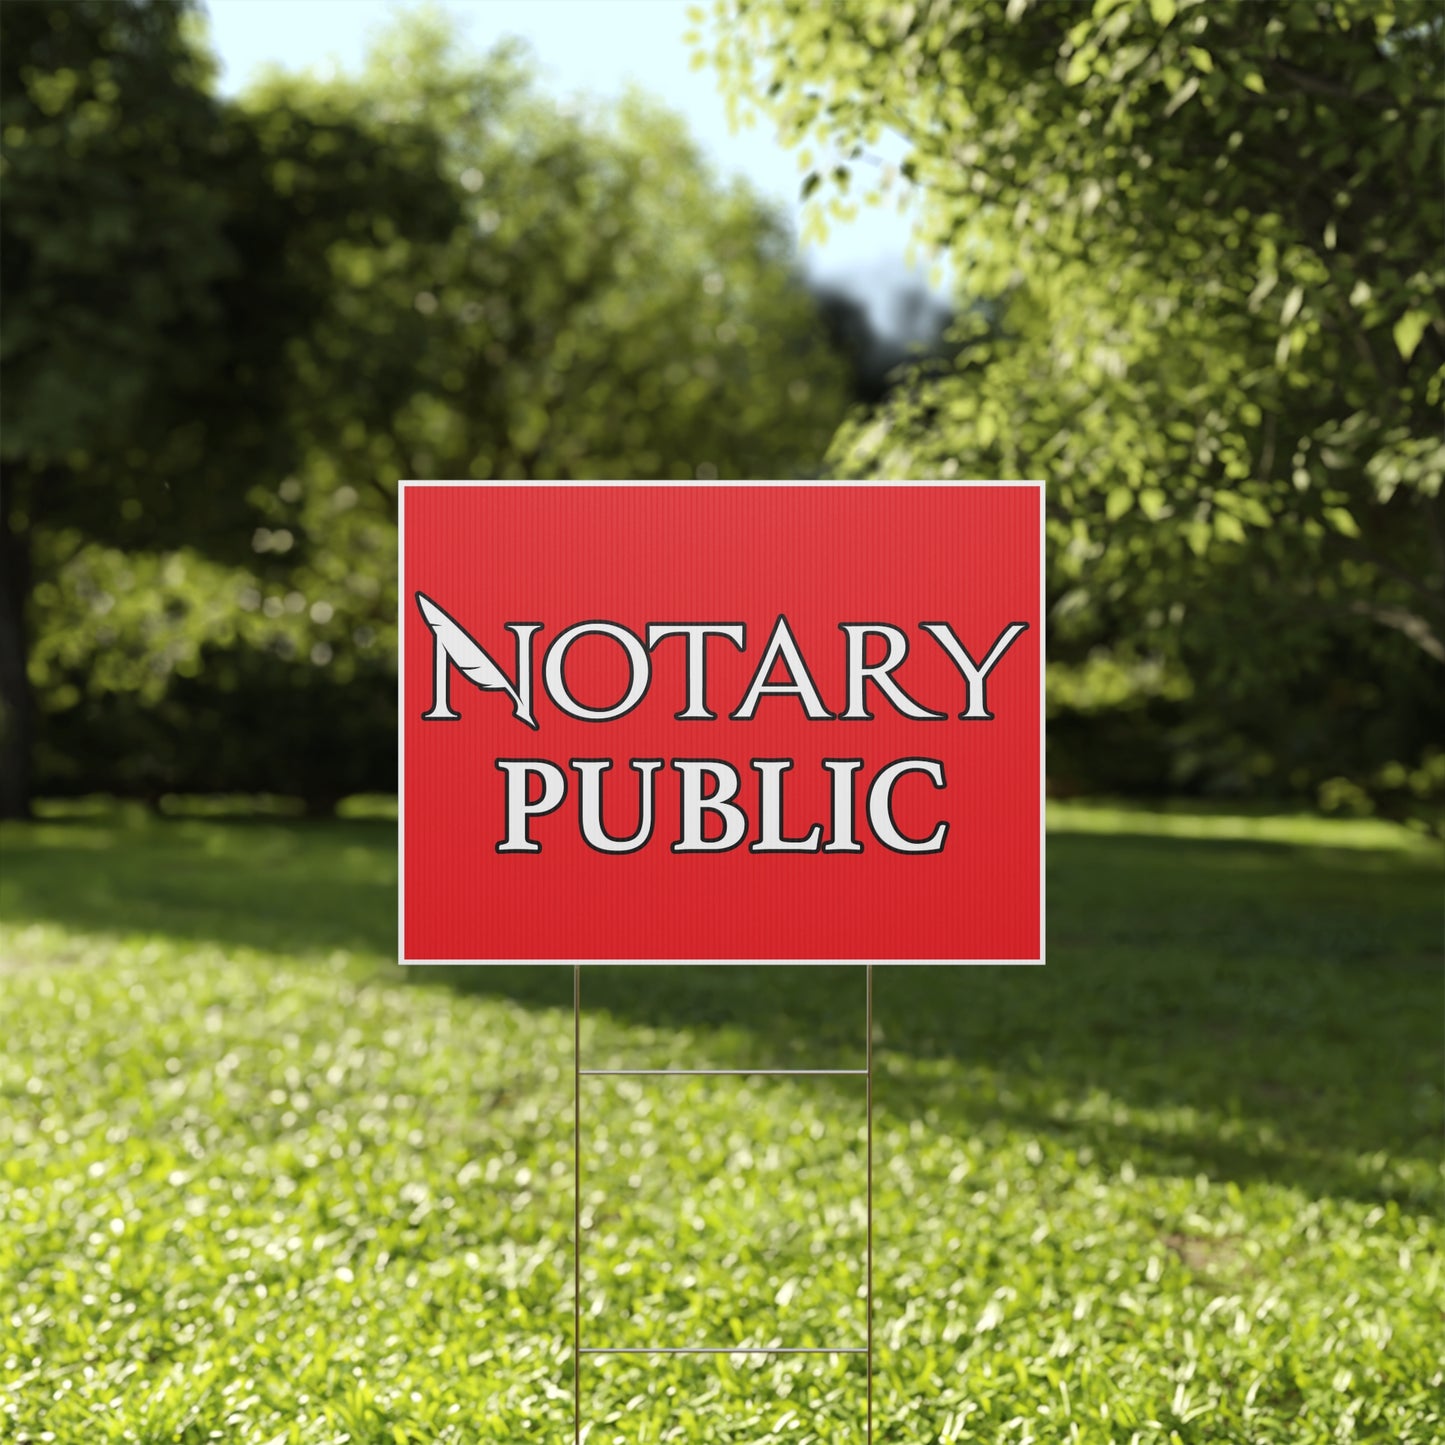 Notary Services, Notary Public Yard Sign, 18x12, 24x18, 36x24, Double Sided H-Stake Included, v4